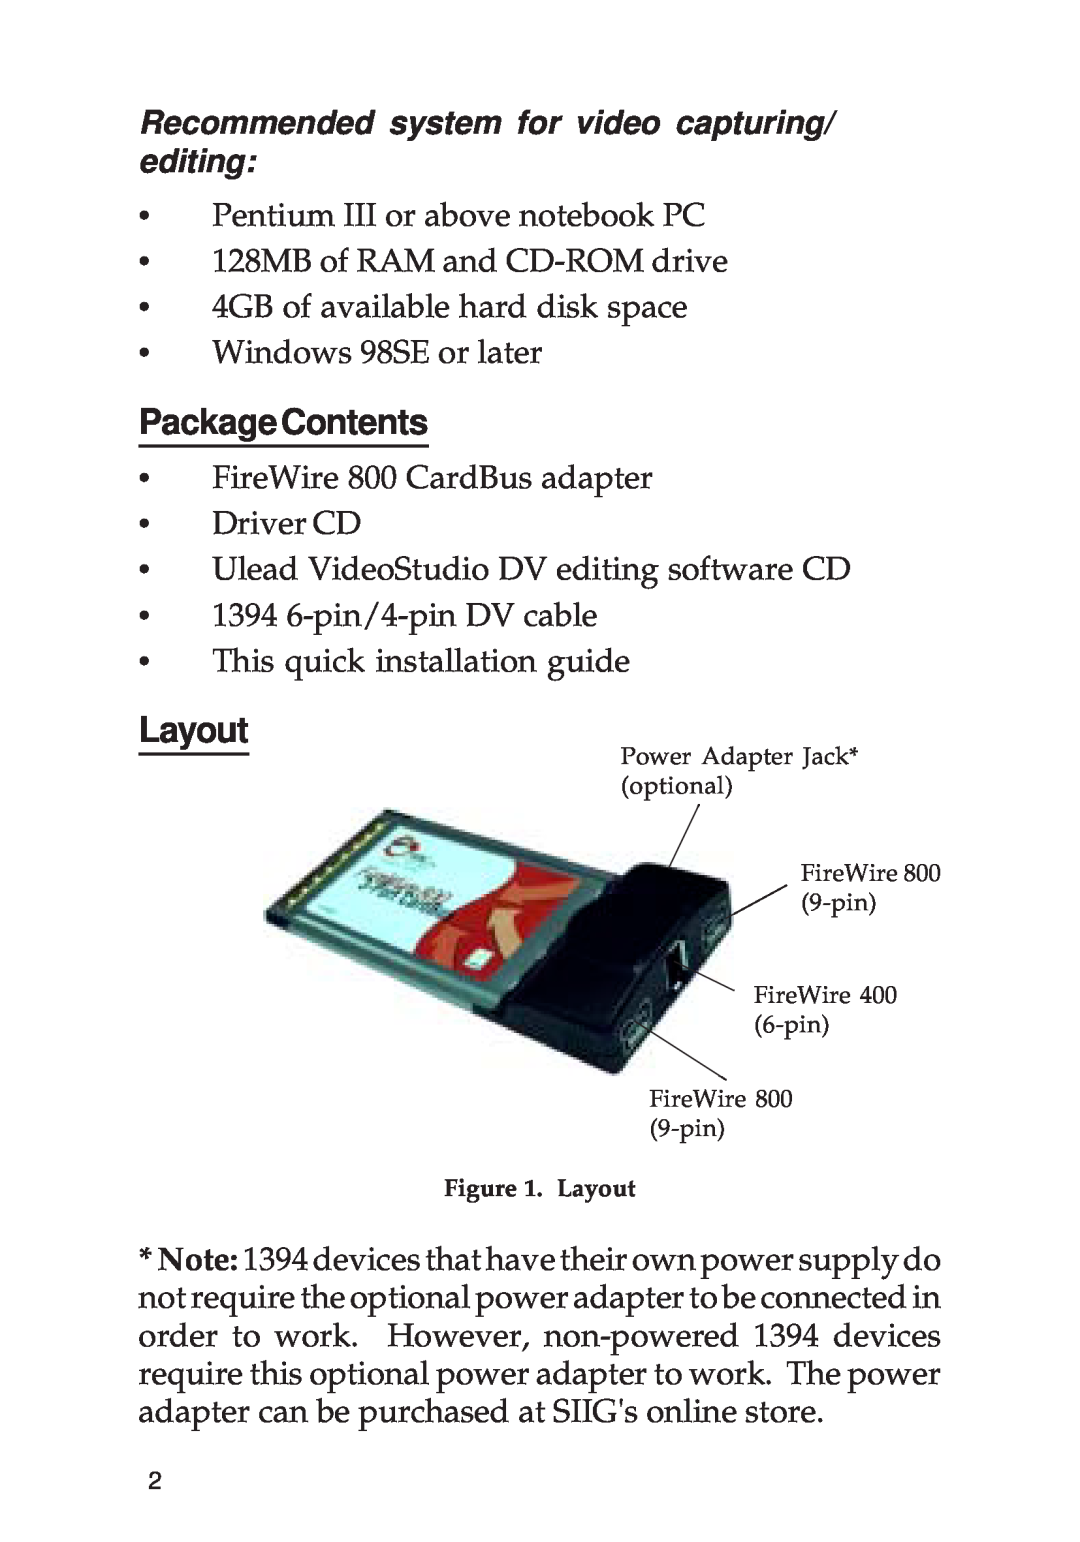 SIIG 700 manual PackageContents, Layout, Recommended system for video capturing/ editing 